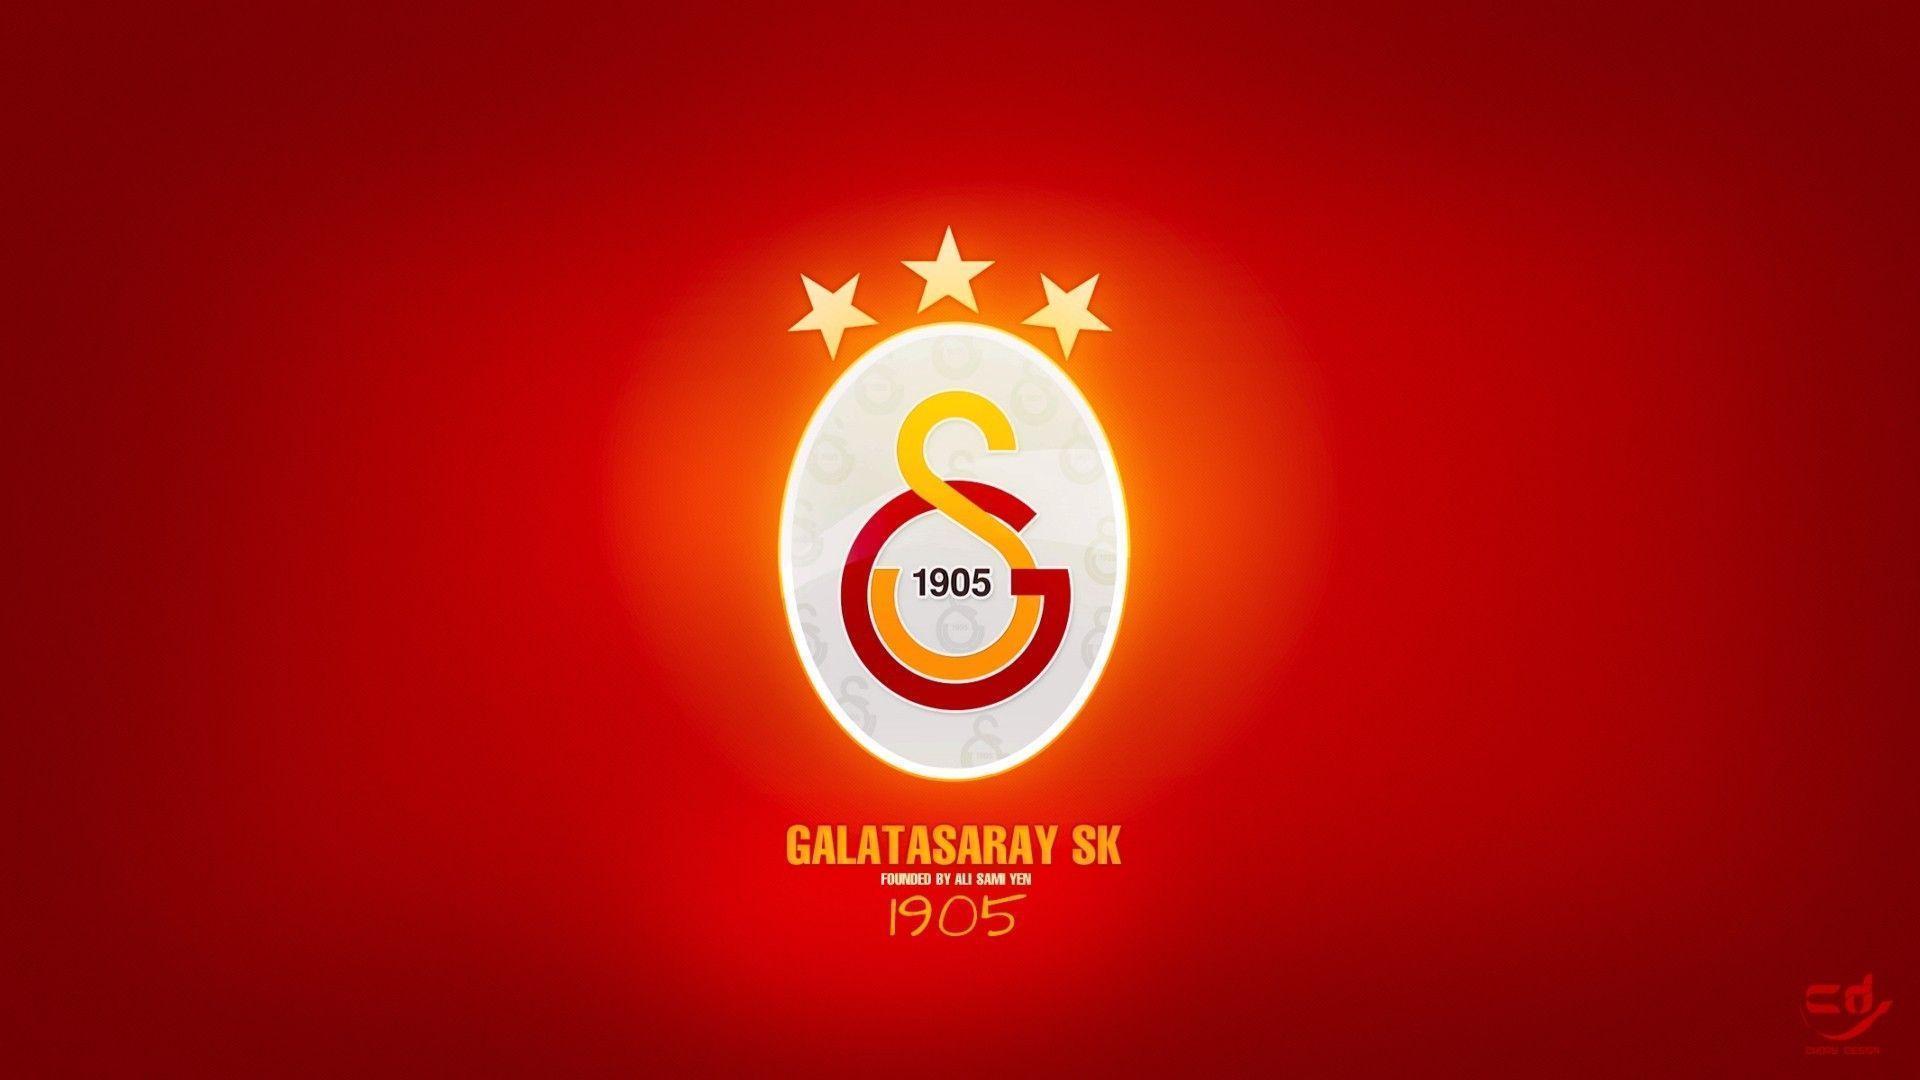 Galatasaray S.K. Wallpaper HD / Desktop and Mobile Background